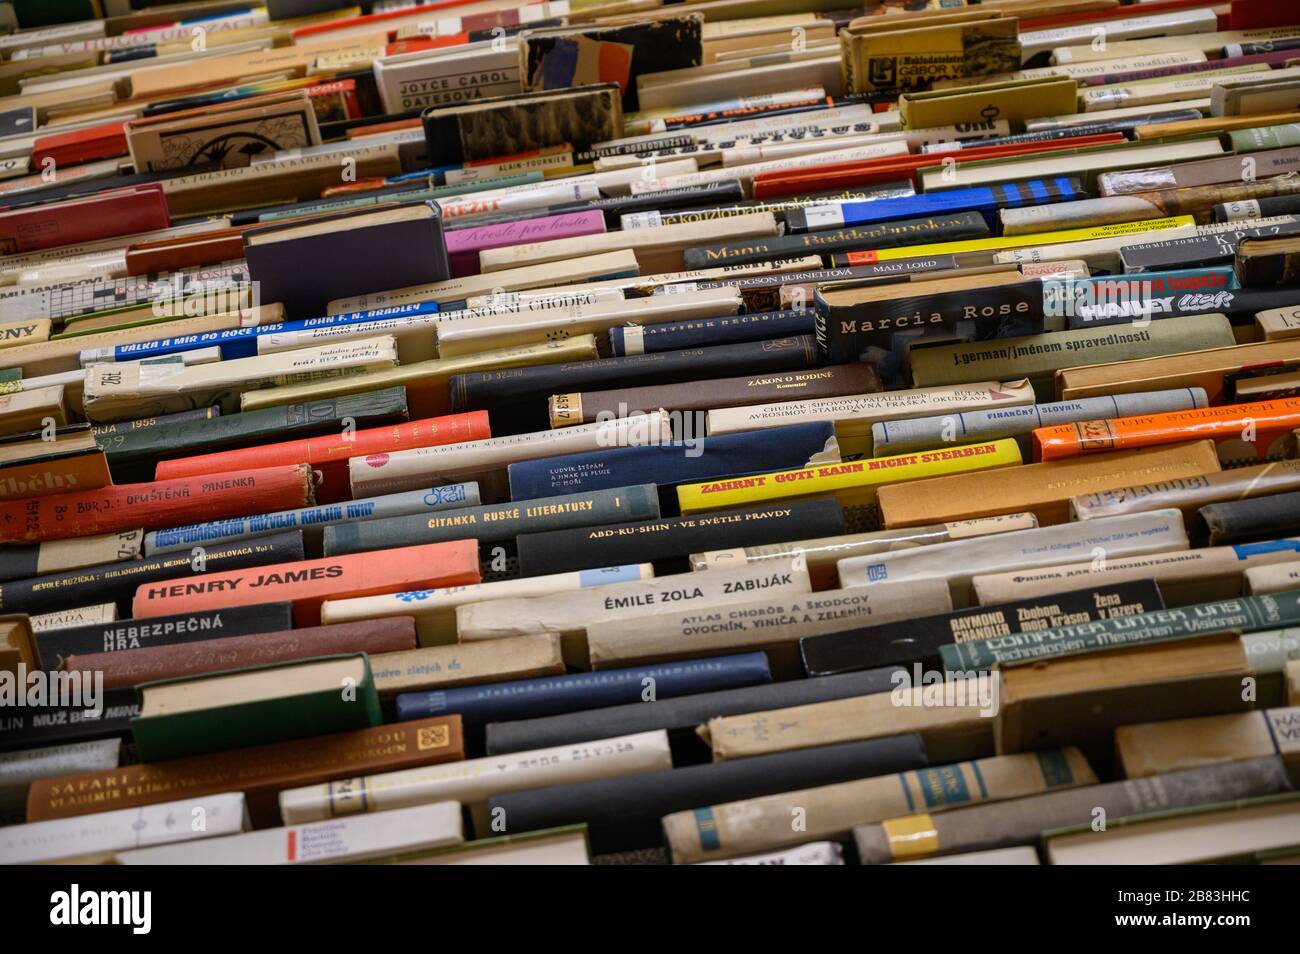 Bratislava, Slovakia. 2020/01/26. A display of stacks of old books as part of the exhibition by Matej Krén. Bratislava City Gallery. Stock Photo